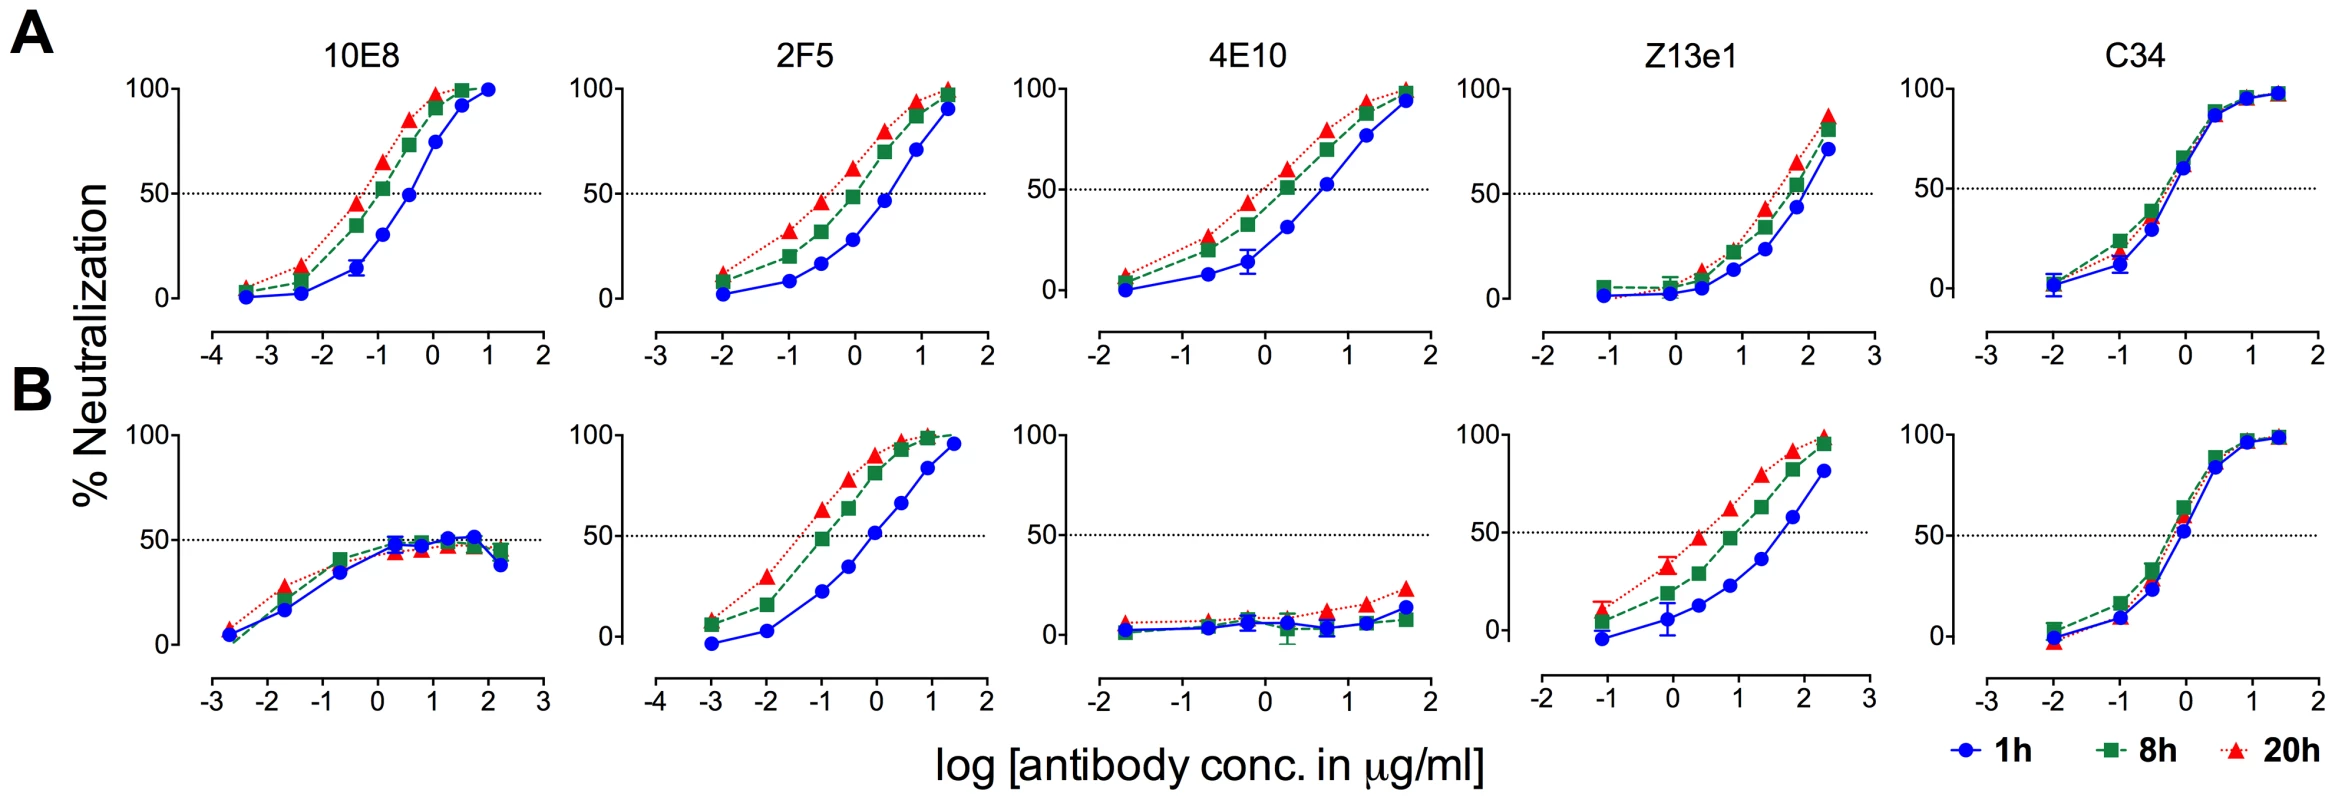 Kinetics of neutralization of JR2 F673L mutant by 10E8 and C34.